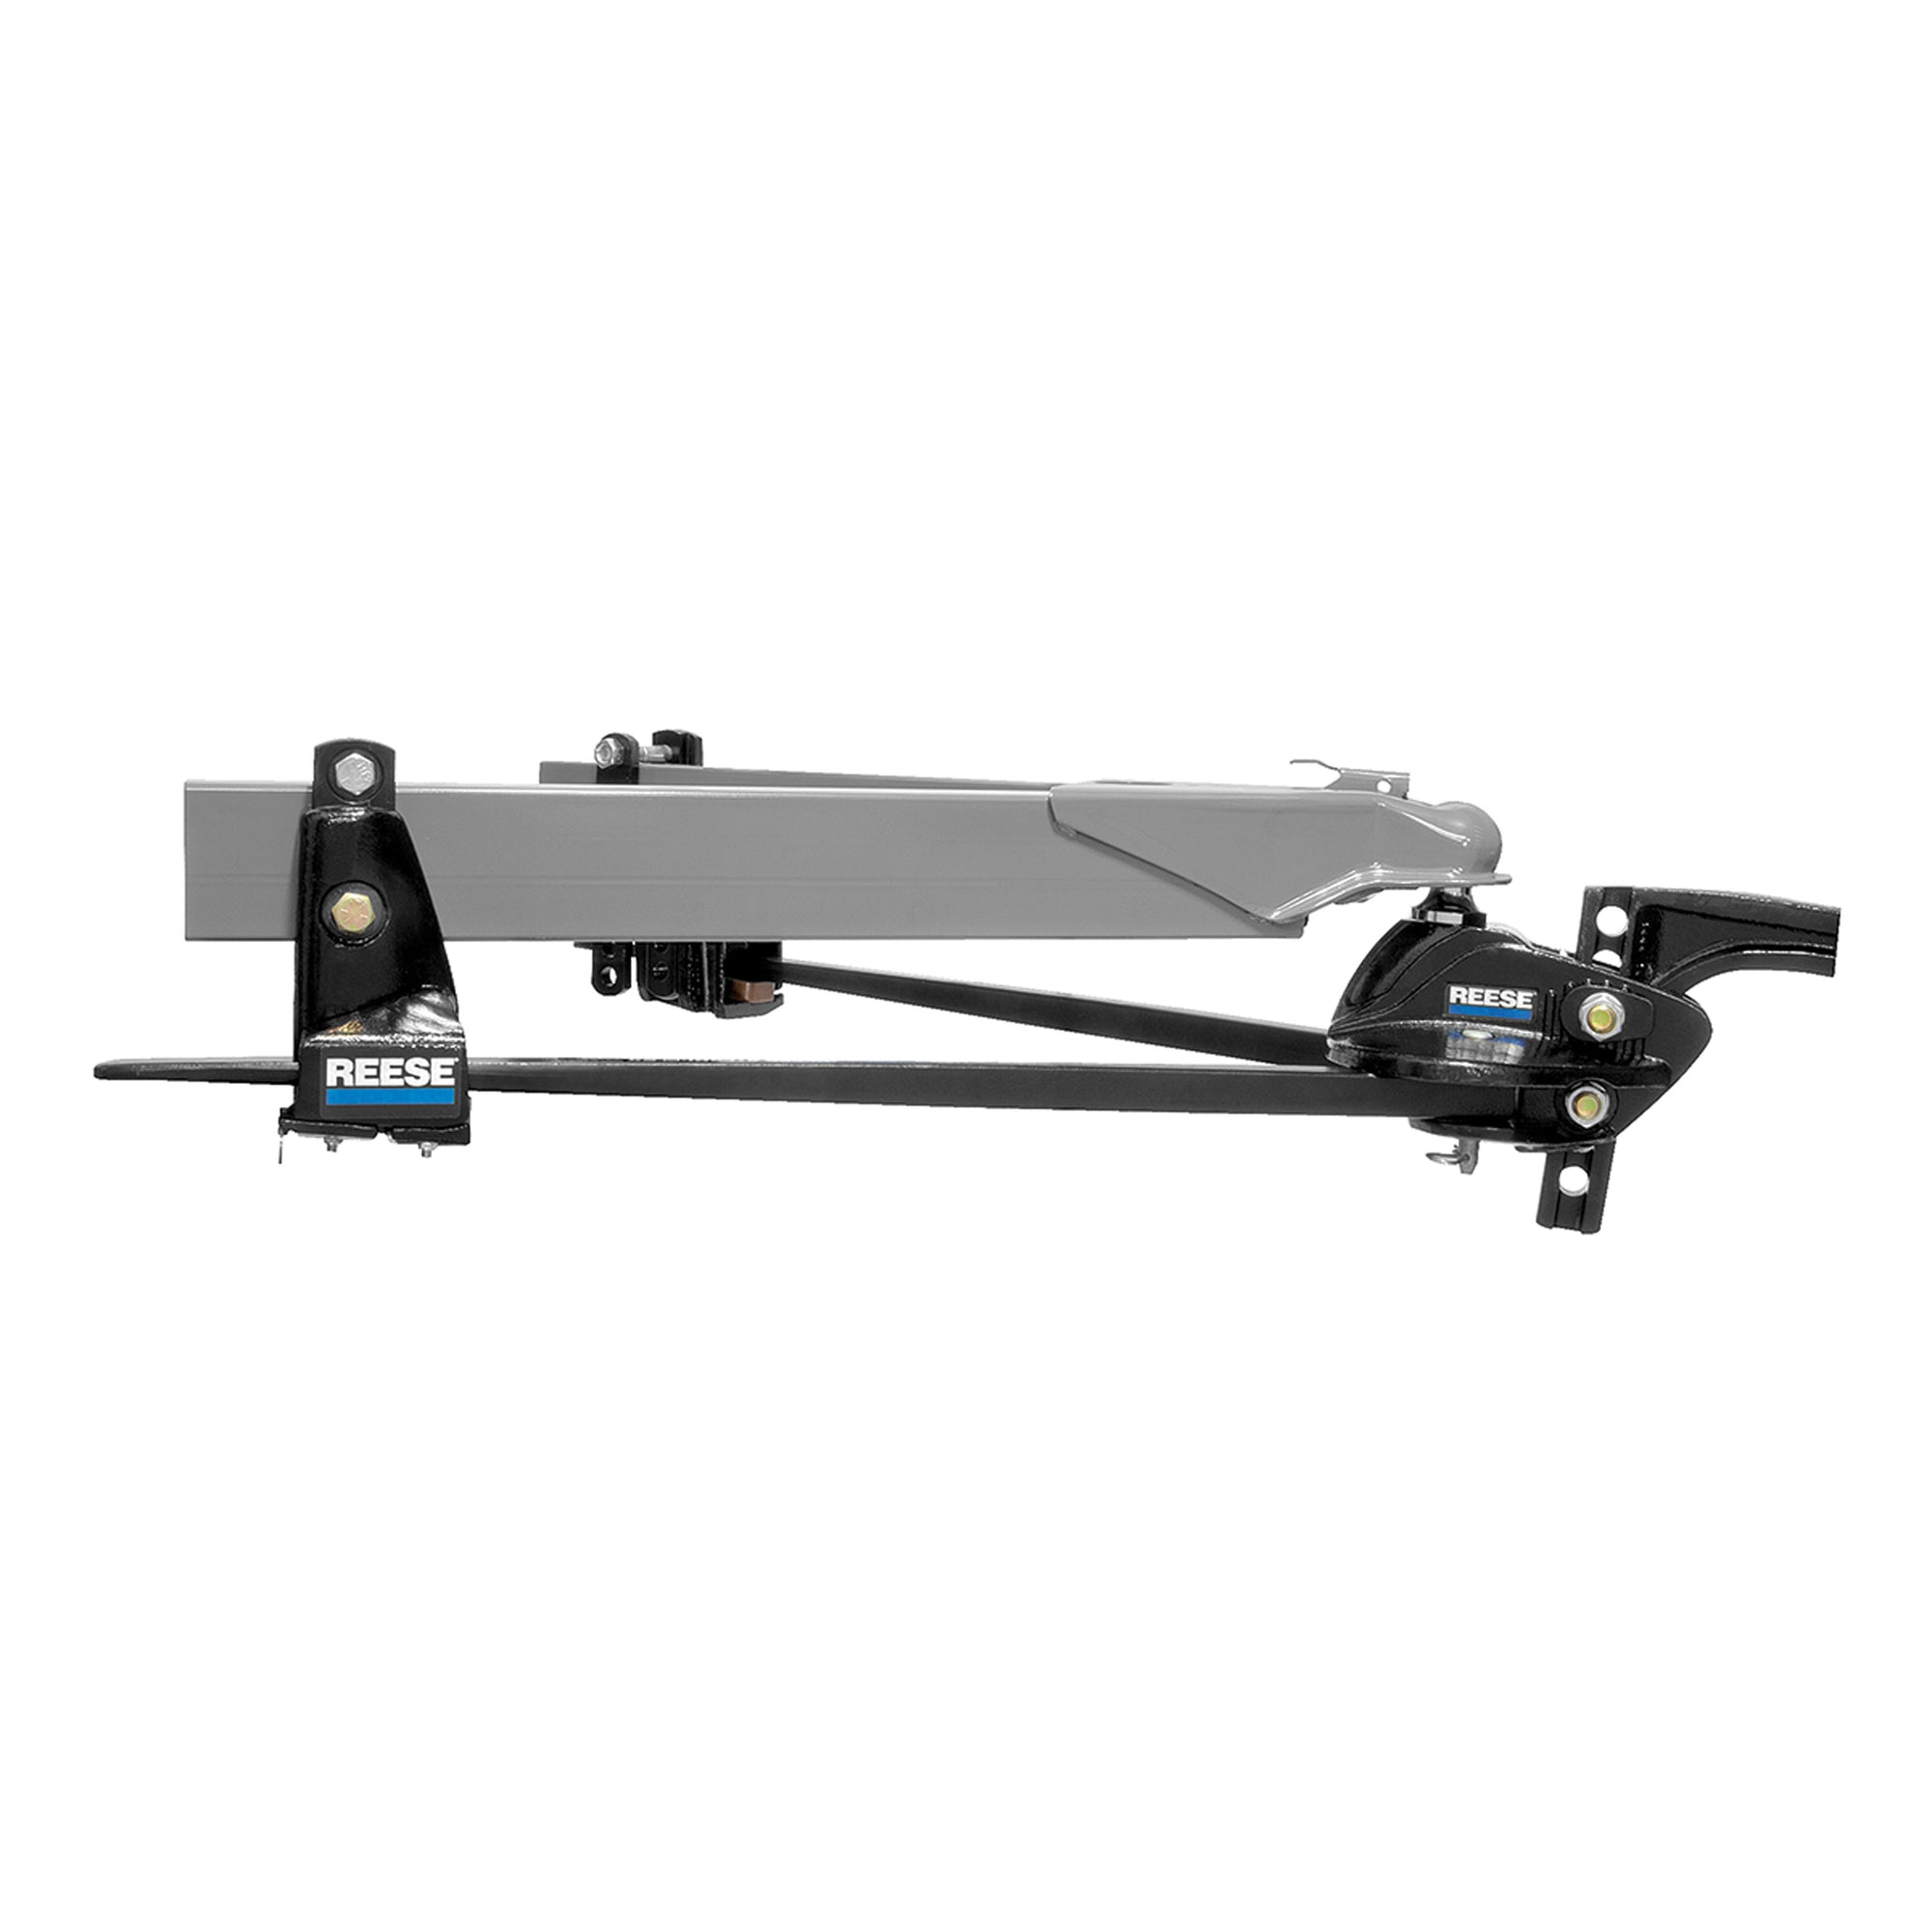 Reese 66559 Steadi-Flex Trunnion Weight-Distributing Hitch Kit with Shank - 10,000 lb.